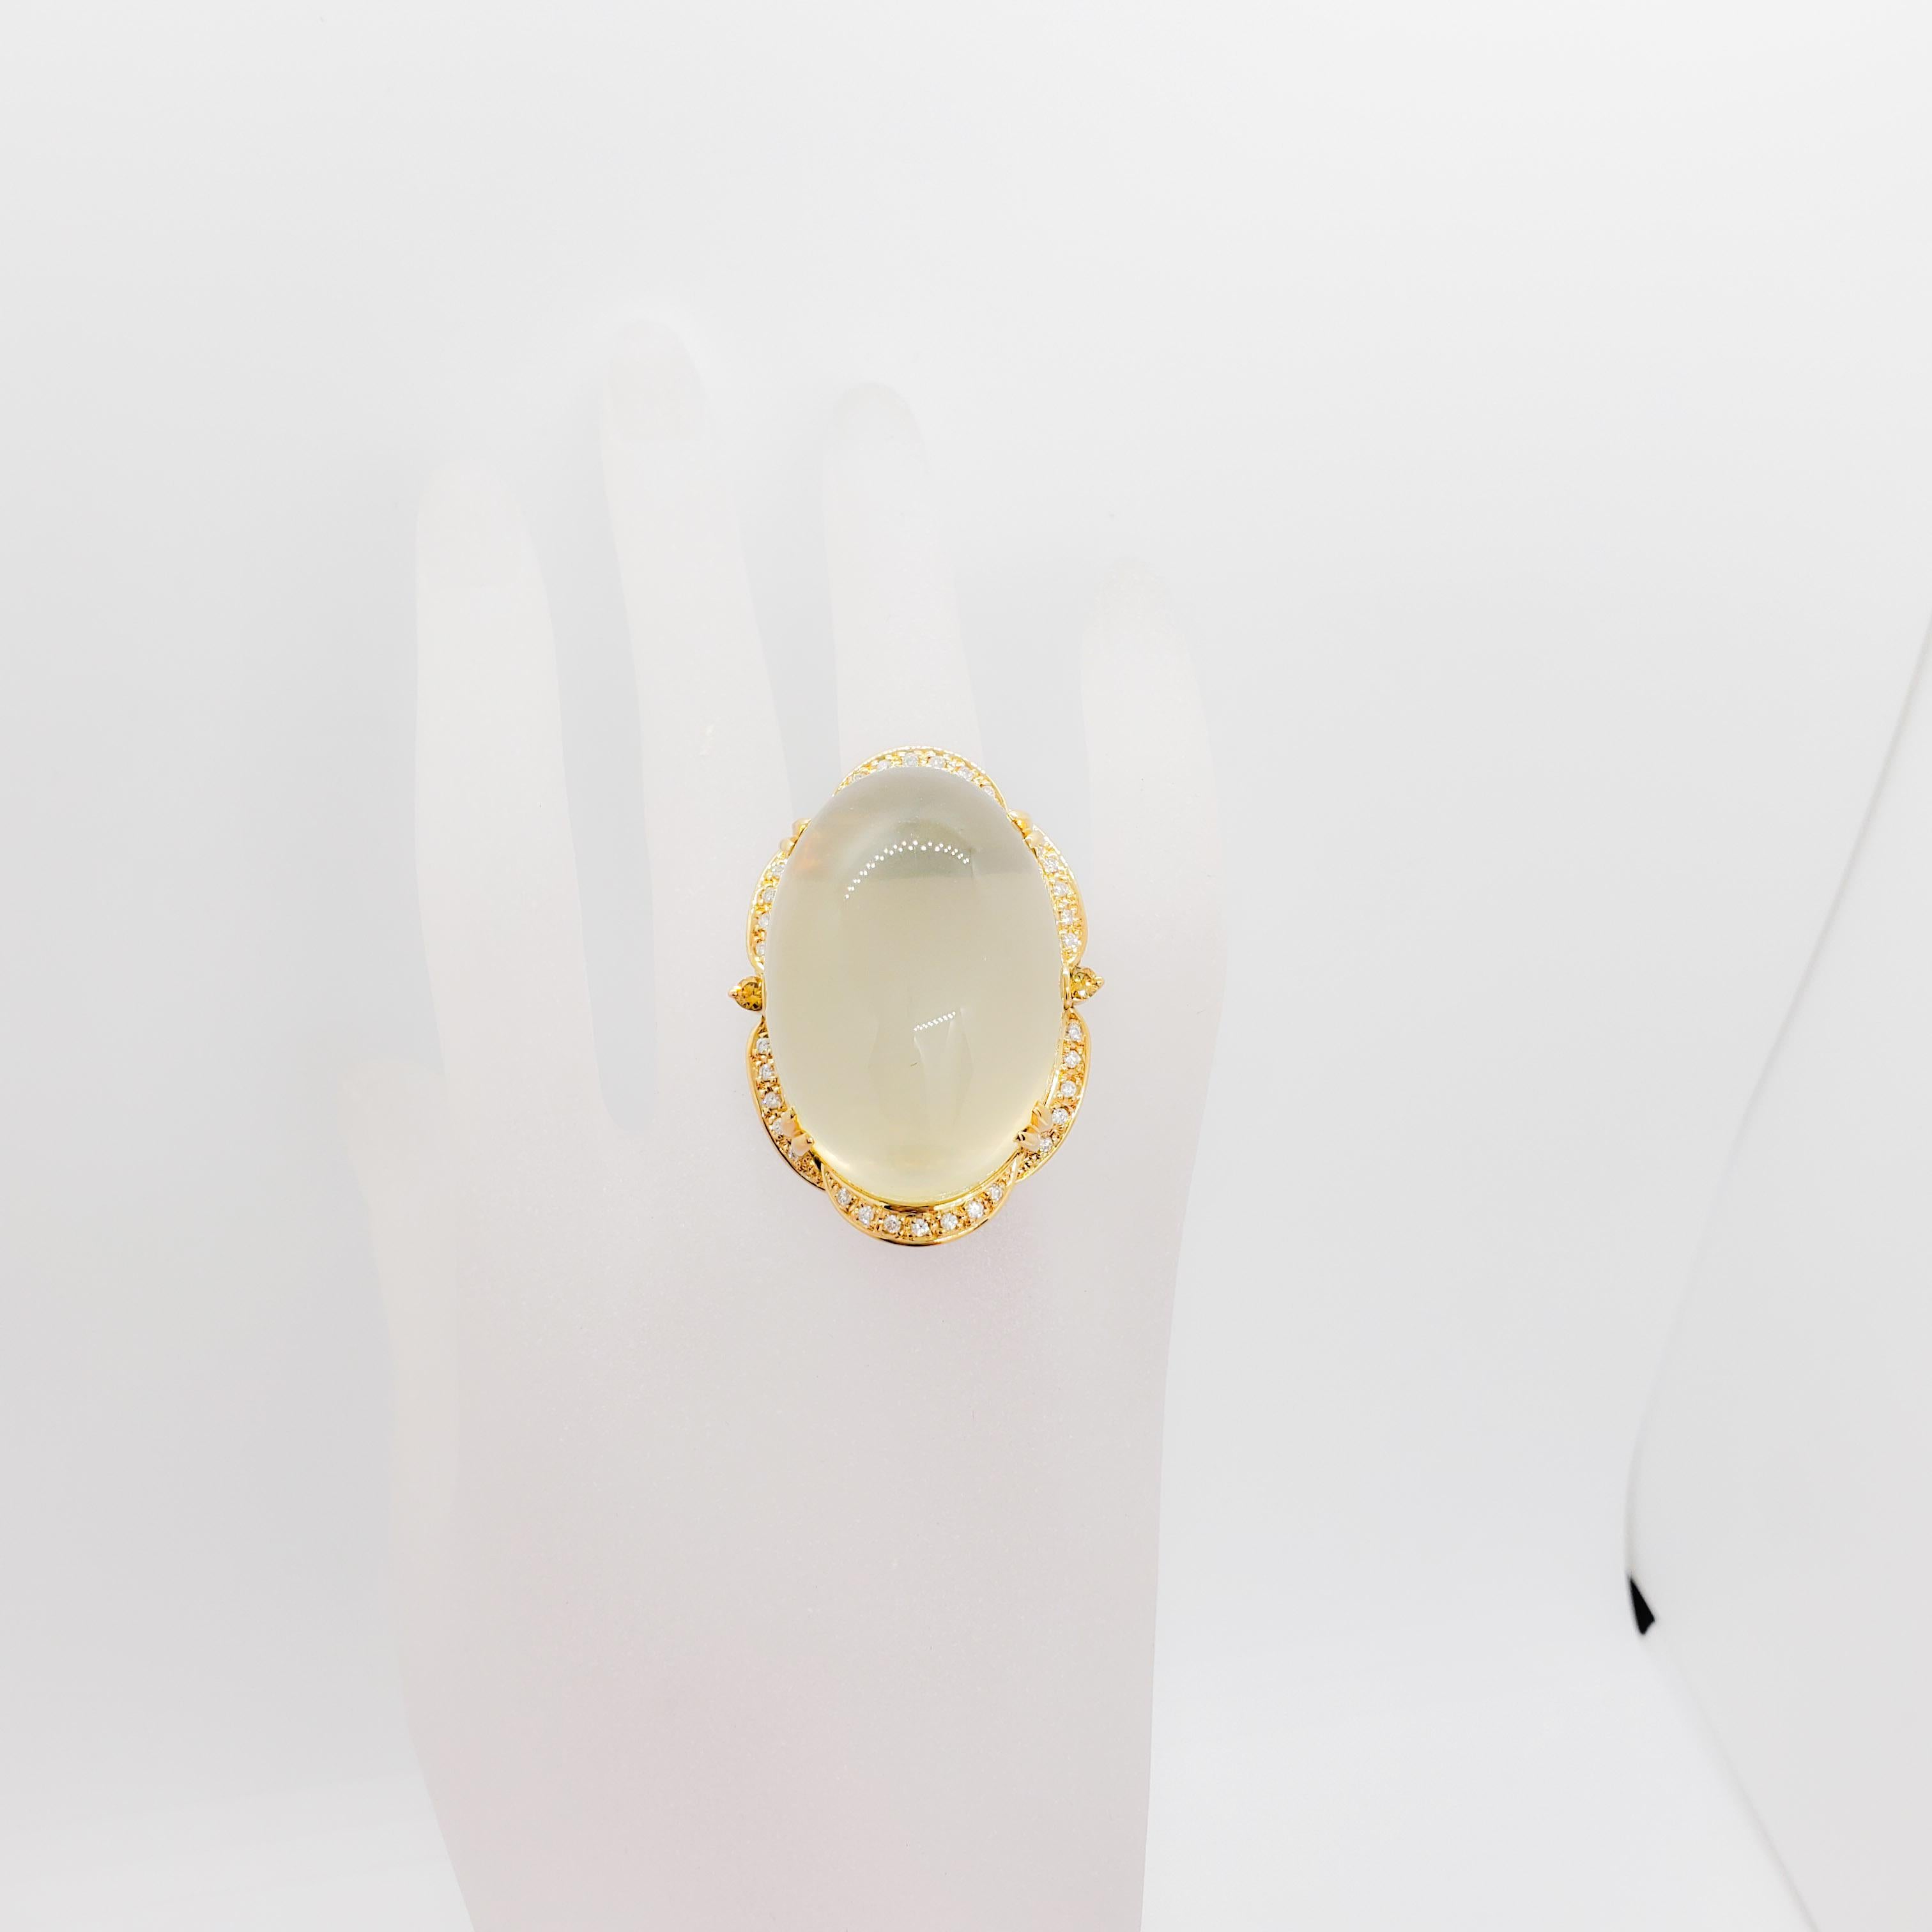 Oval Cut Moonstone Oval Cabochon and White Diamond Cocktail Ring in 18 Karat Yellow Gold